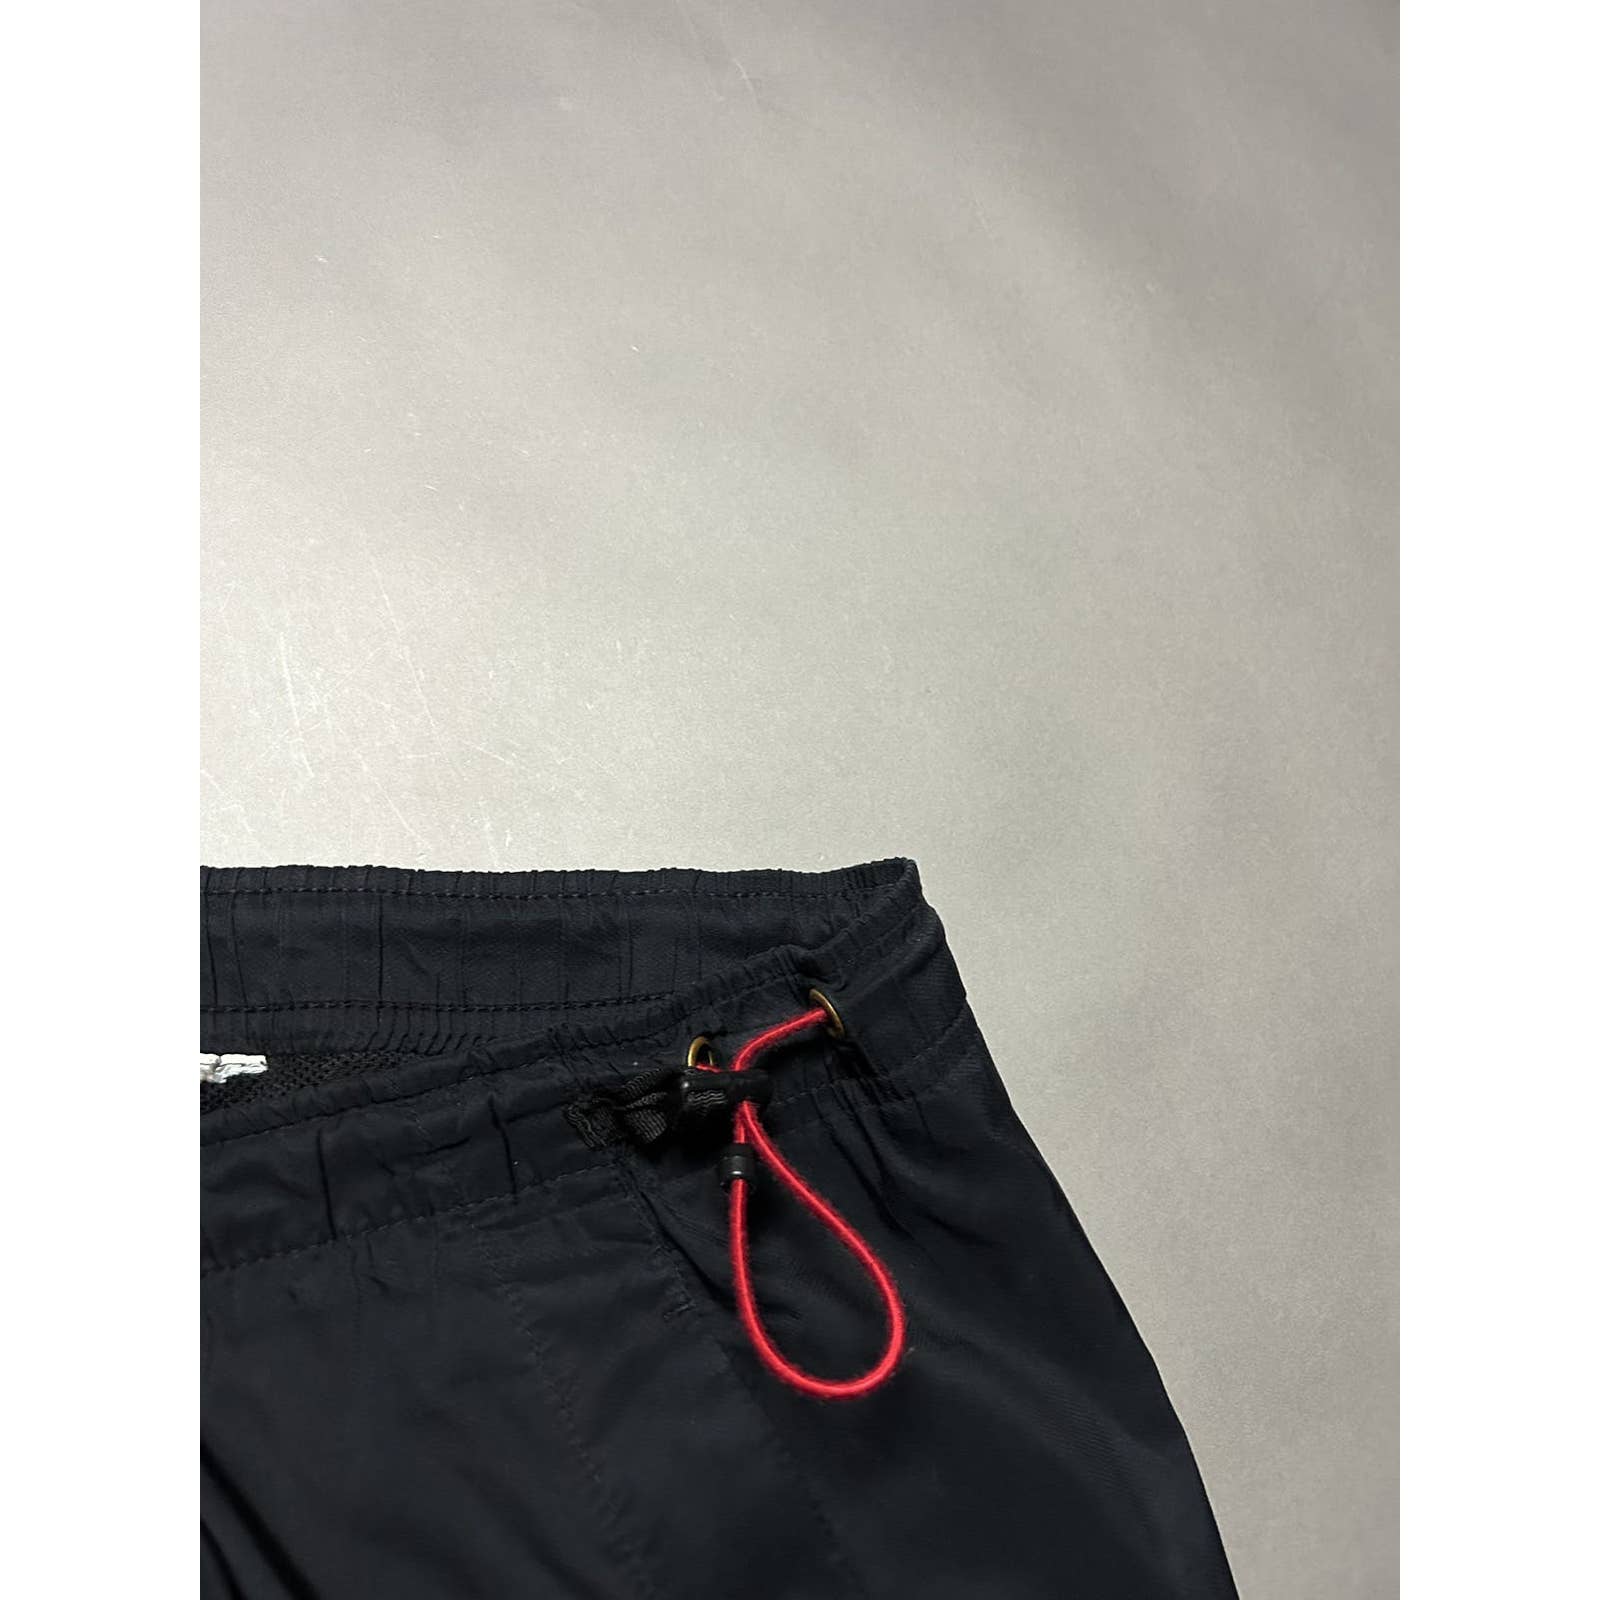 Nike vintage nylon black red track pants cargo parachute AIR – Refitted